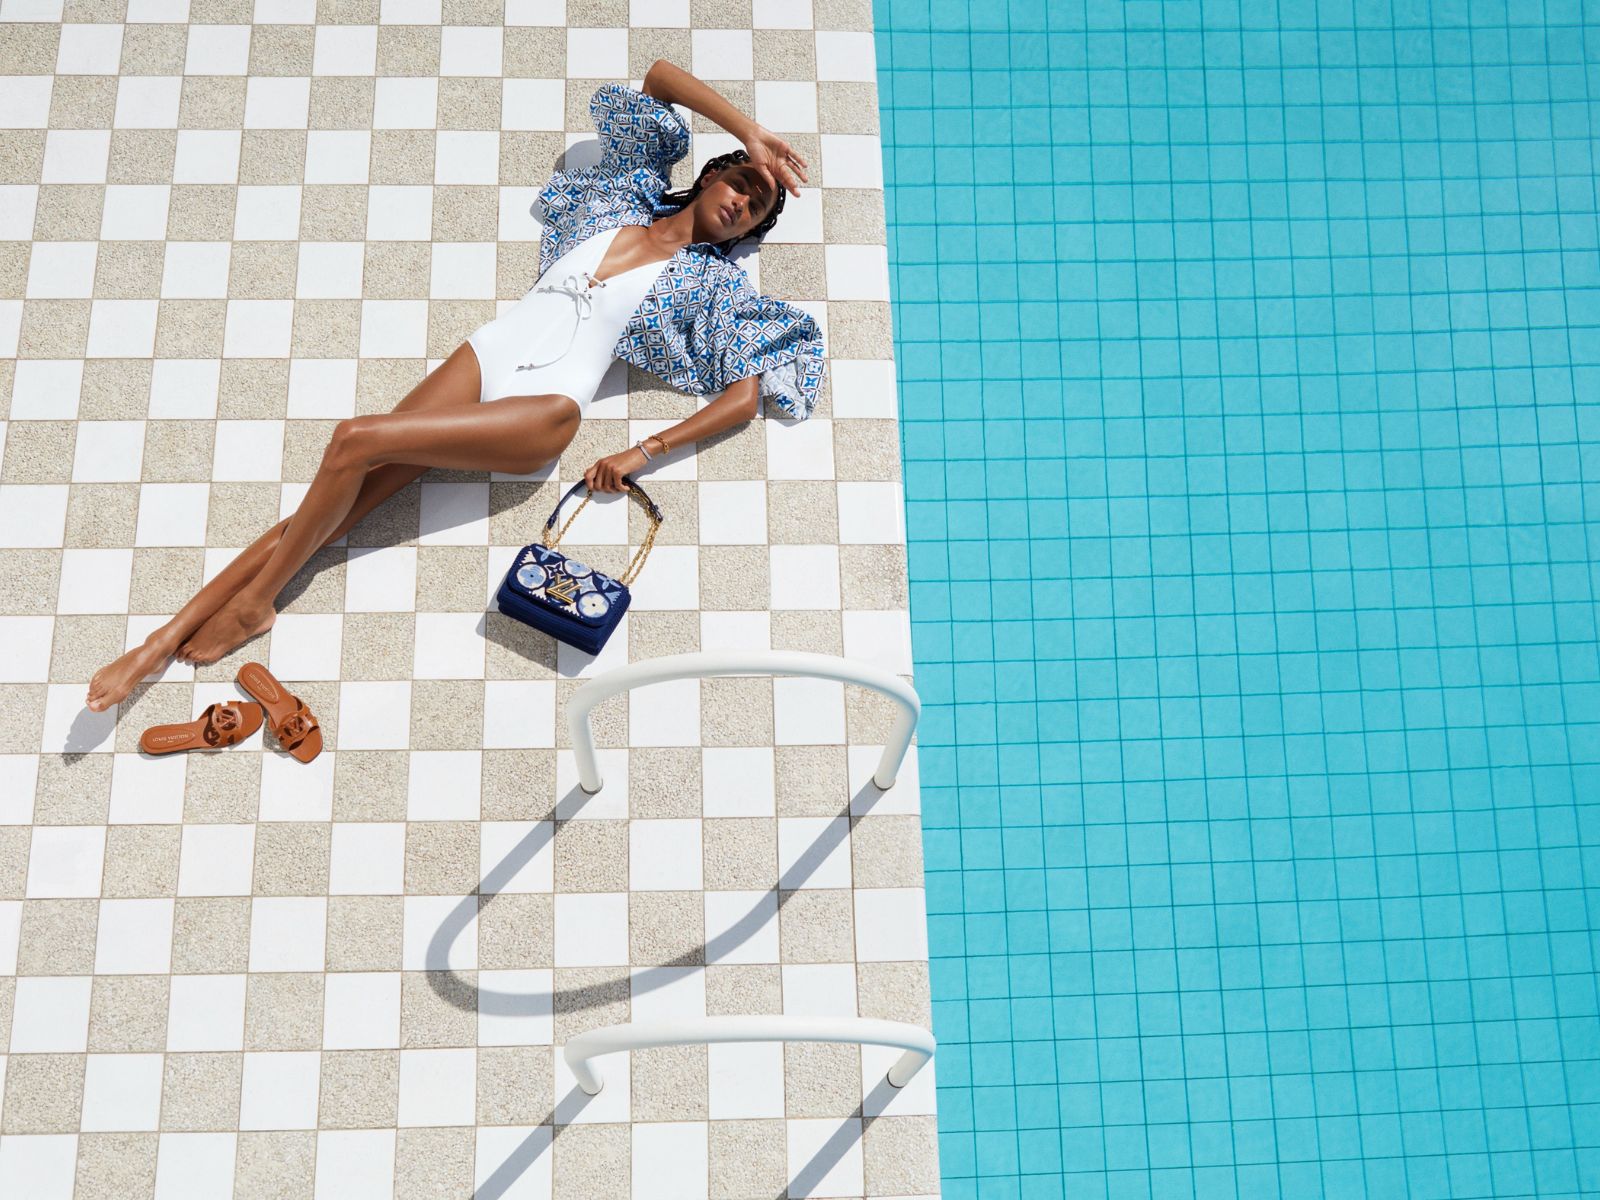 Louis Vuitton Teases a Diverse Summer-Ready Collection of Bags and Bikinis